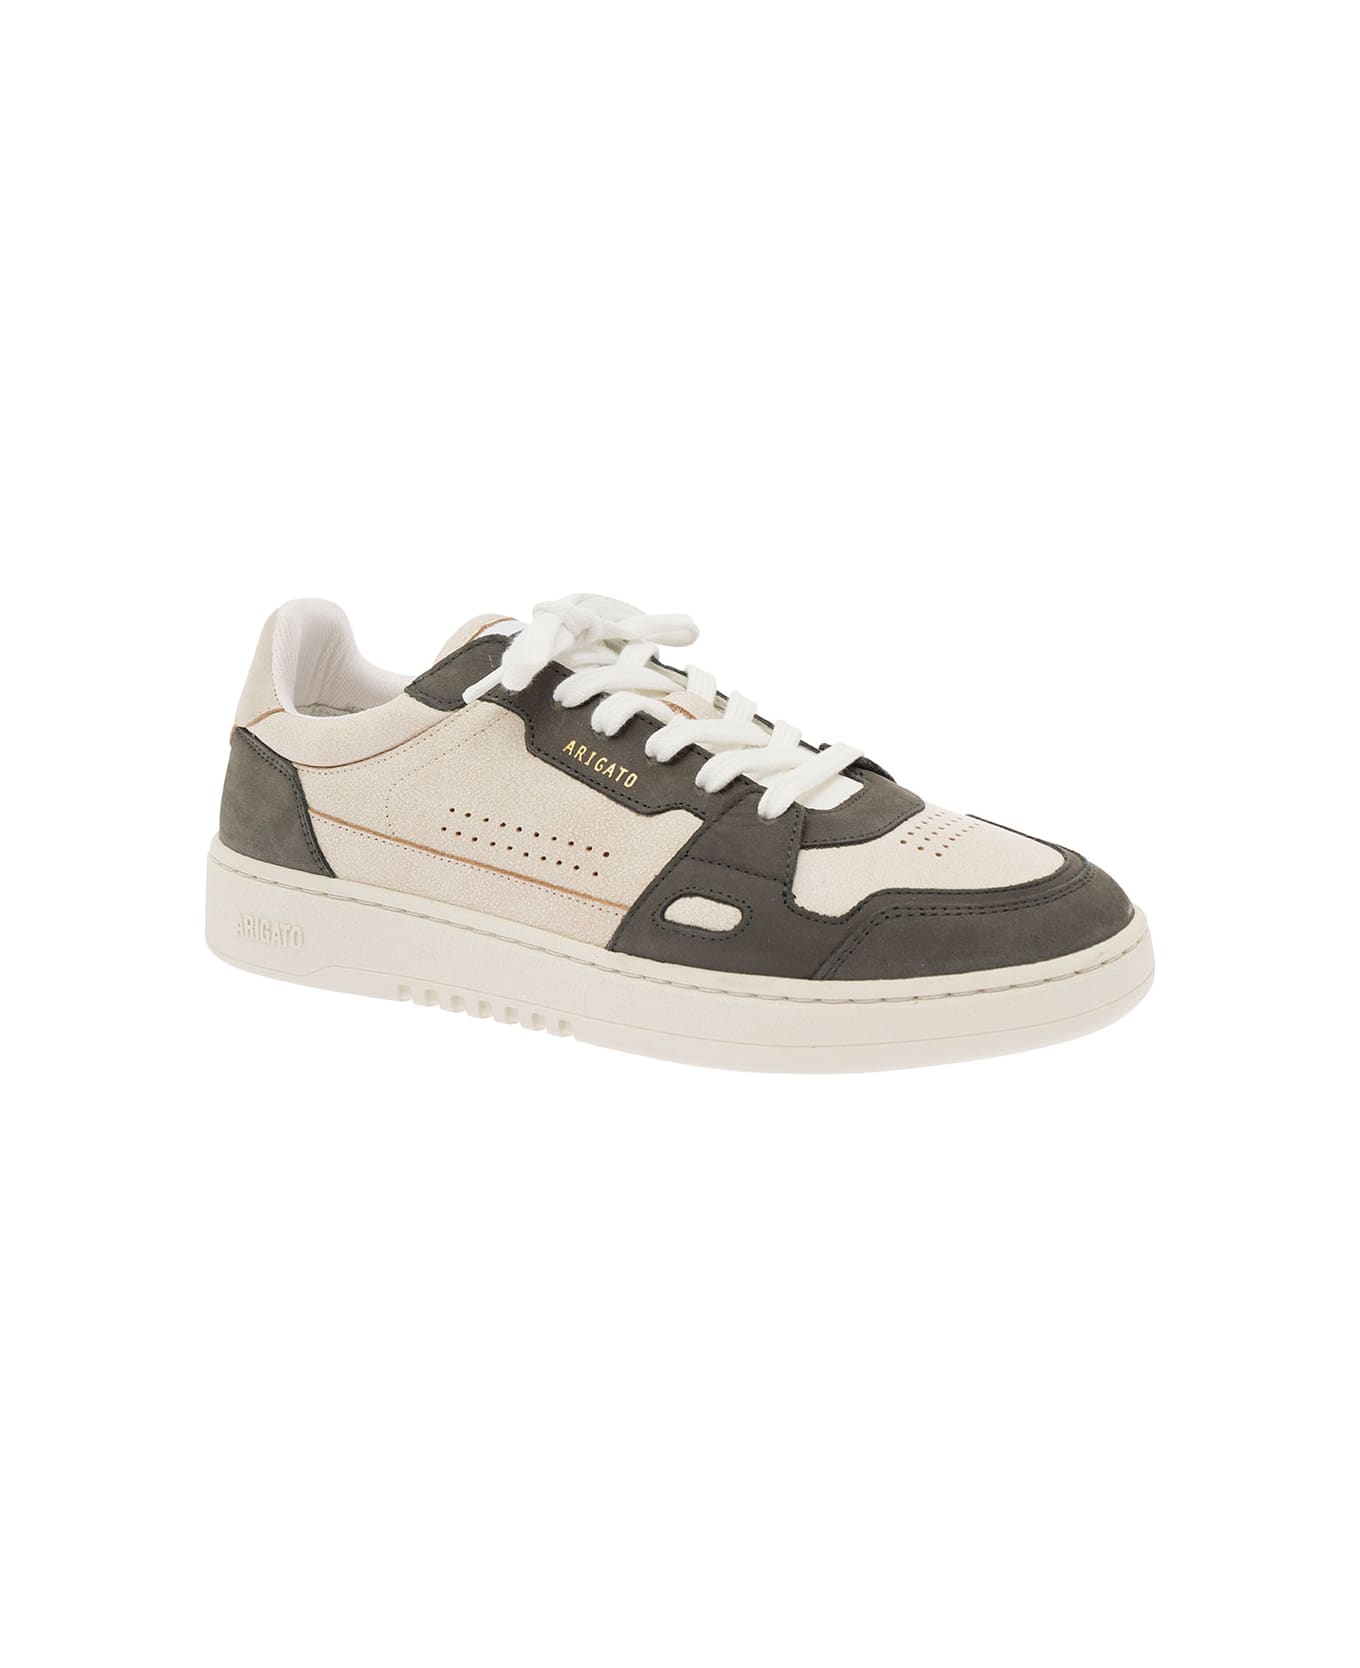 Axel Arigato 'dice Lo' Green And White Two-tone Sneakers In Calf Leather Man - Beige